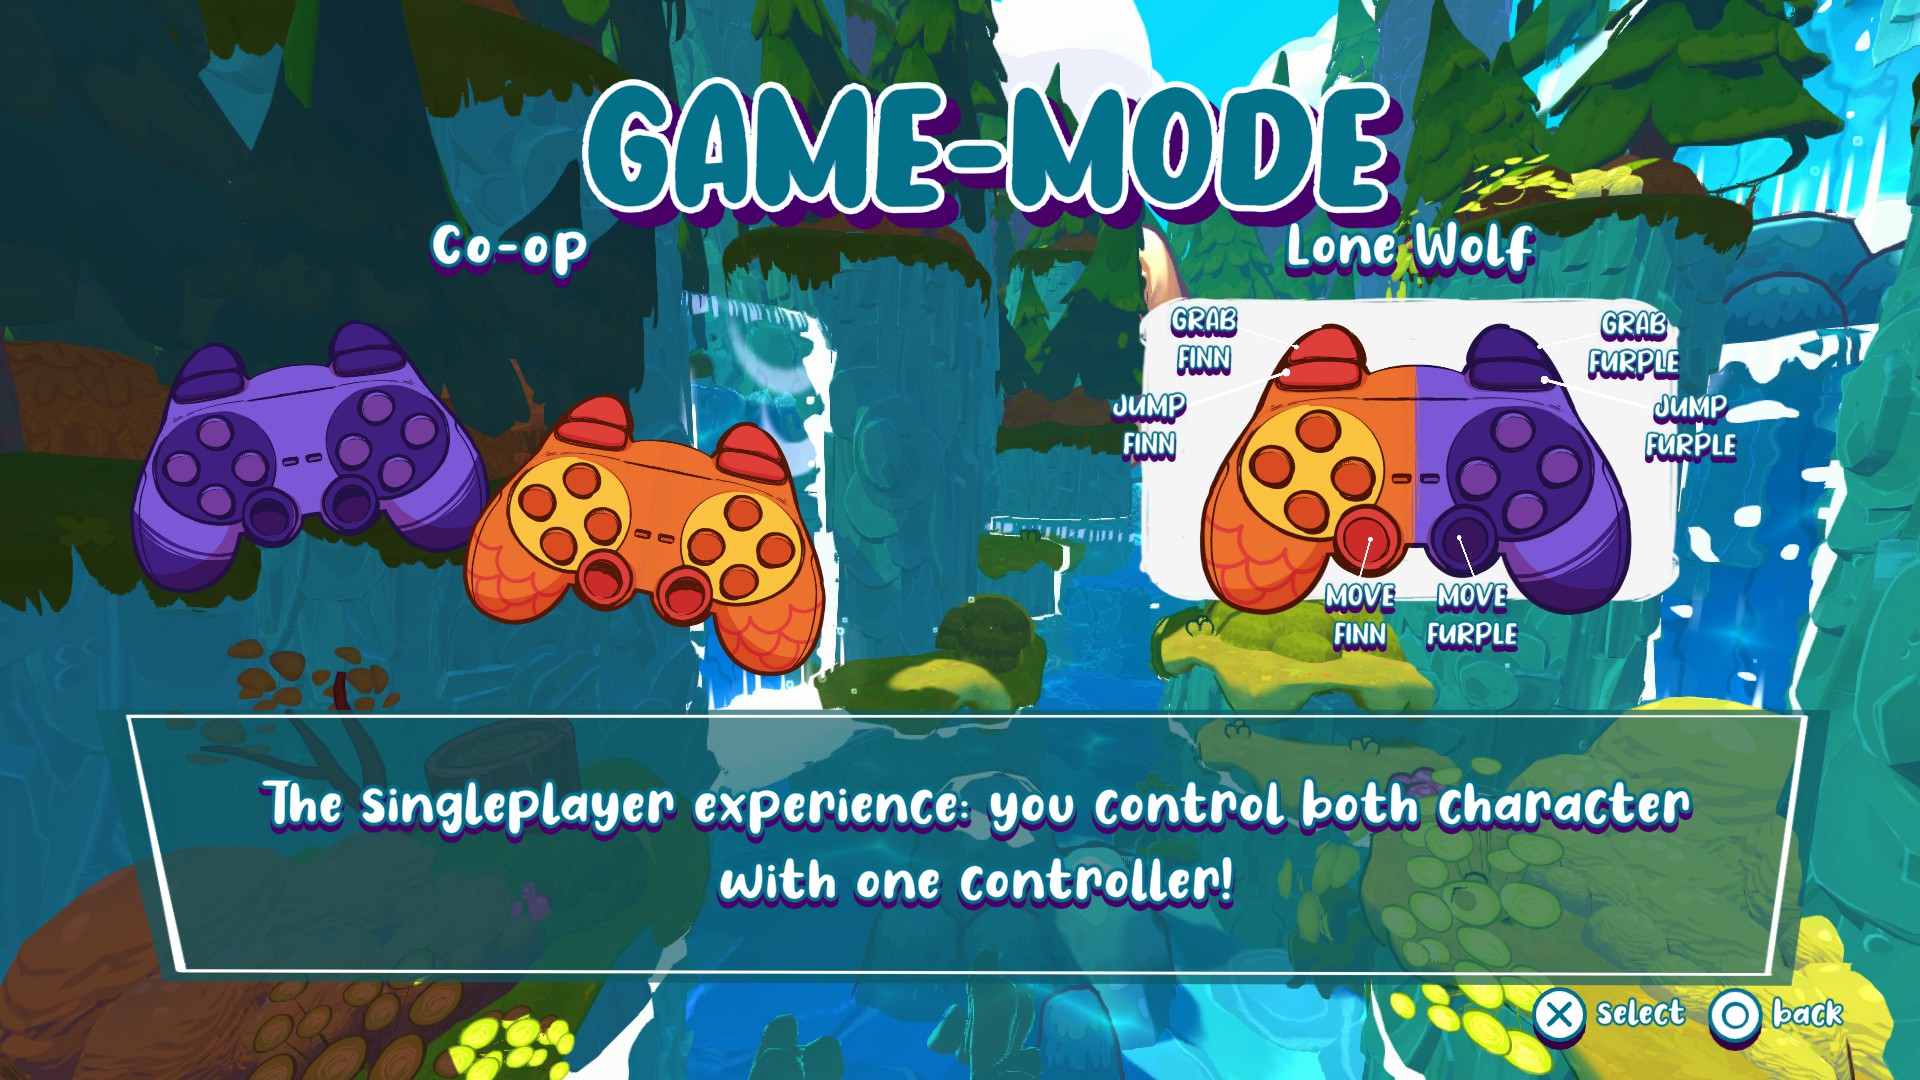 A display of two game modes and the ways the players will use them to play.